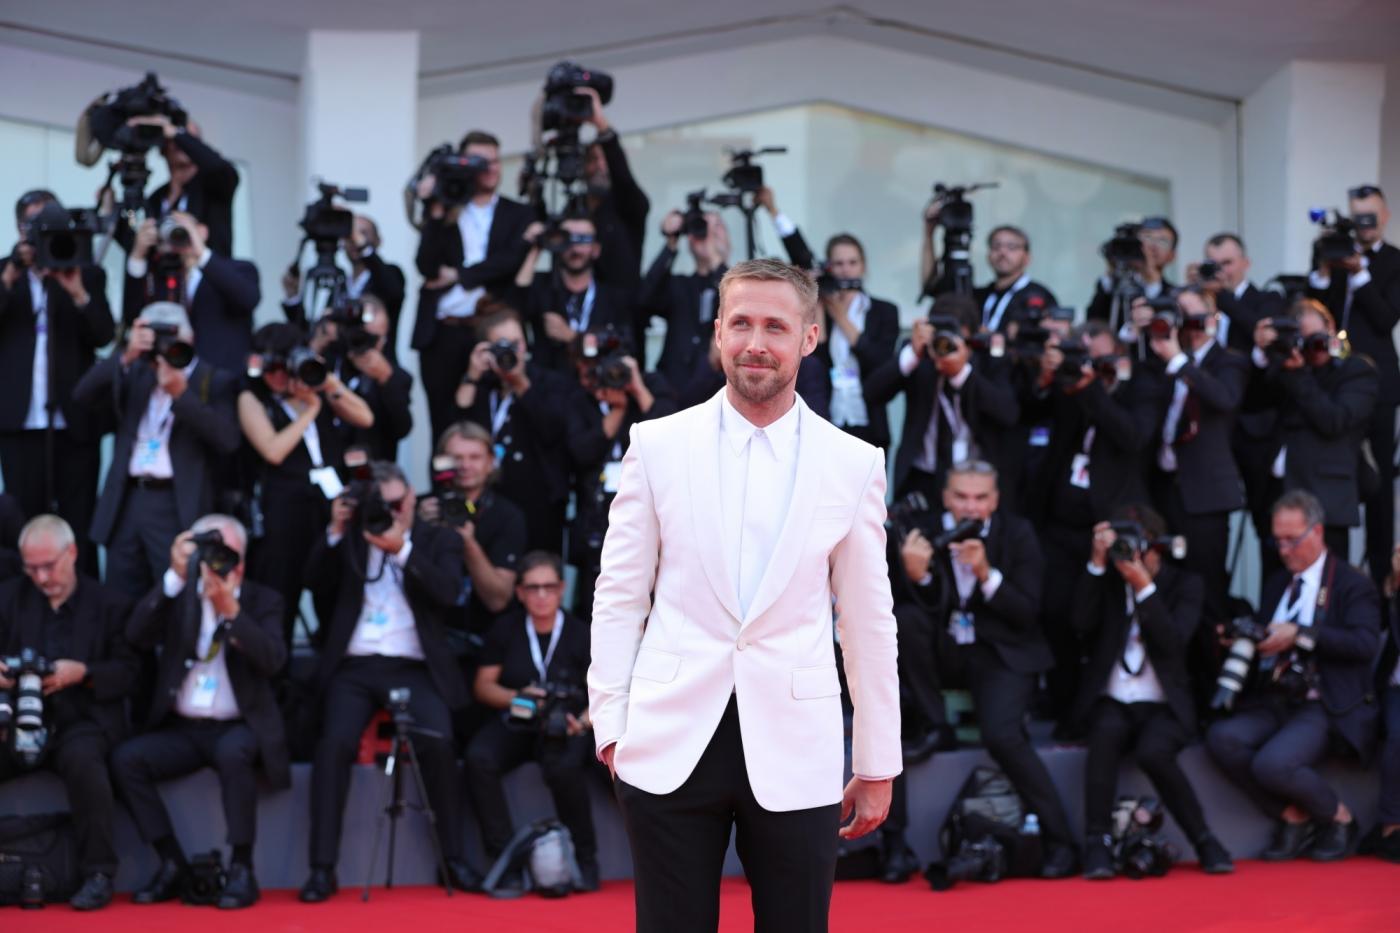 VENICE, Aug. 29, 2018 (Xinhua) -- Actor Ryan Gosling poses on the red carpet of the 75th Venice International Film Festival in Venice, Italy, Aug. 29, 2018. The 75th Venice International Film Festival kicked off here on Wednesday. (Xinhua/Cheng Tingting/IANS) by .